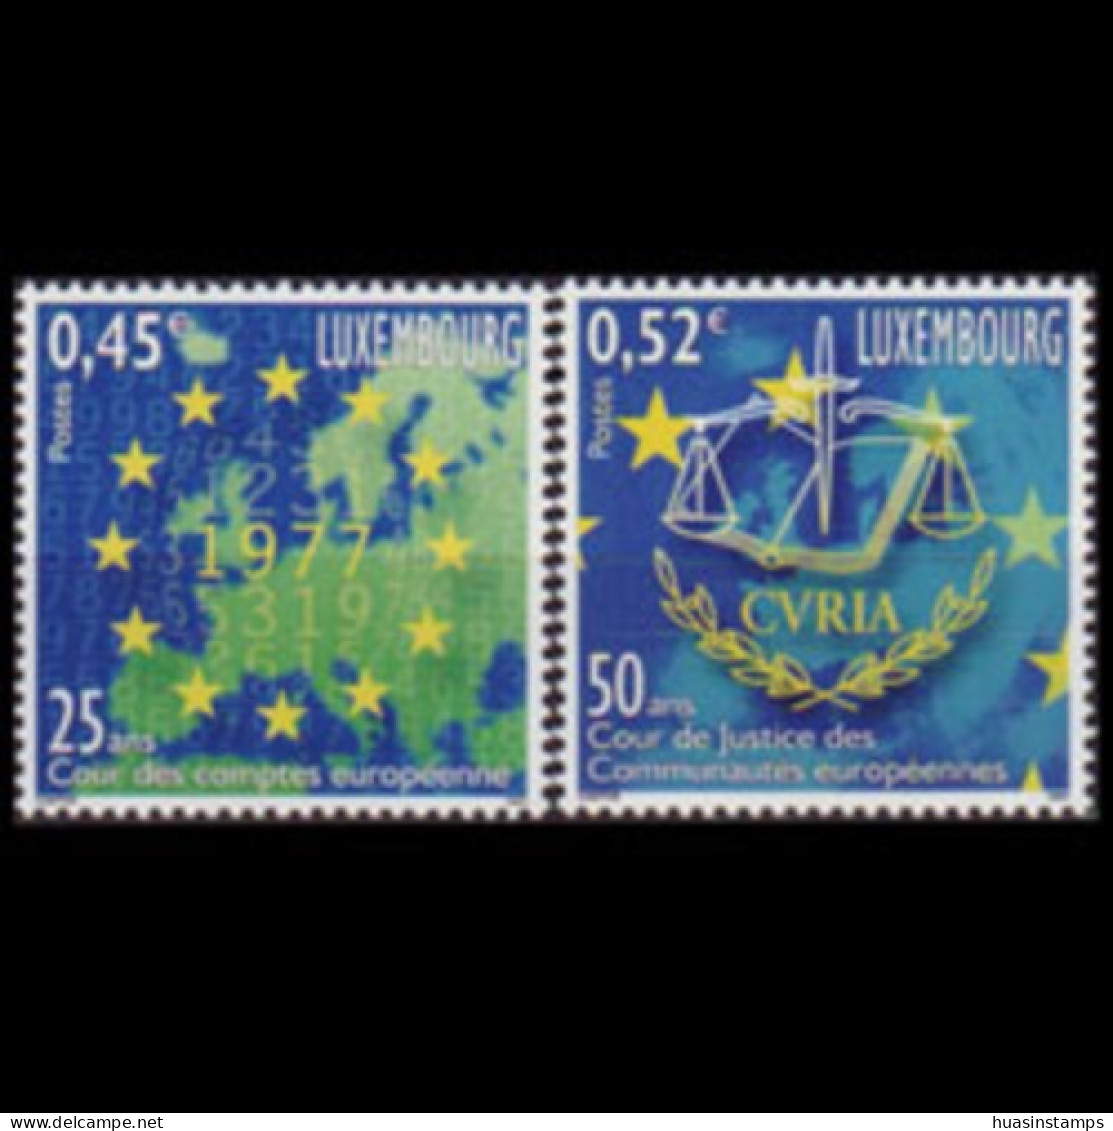 LUXEMBOURG 2002 - Scott# 1088-9 Europe Court Set Of 2 MNH - Unused Stamps